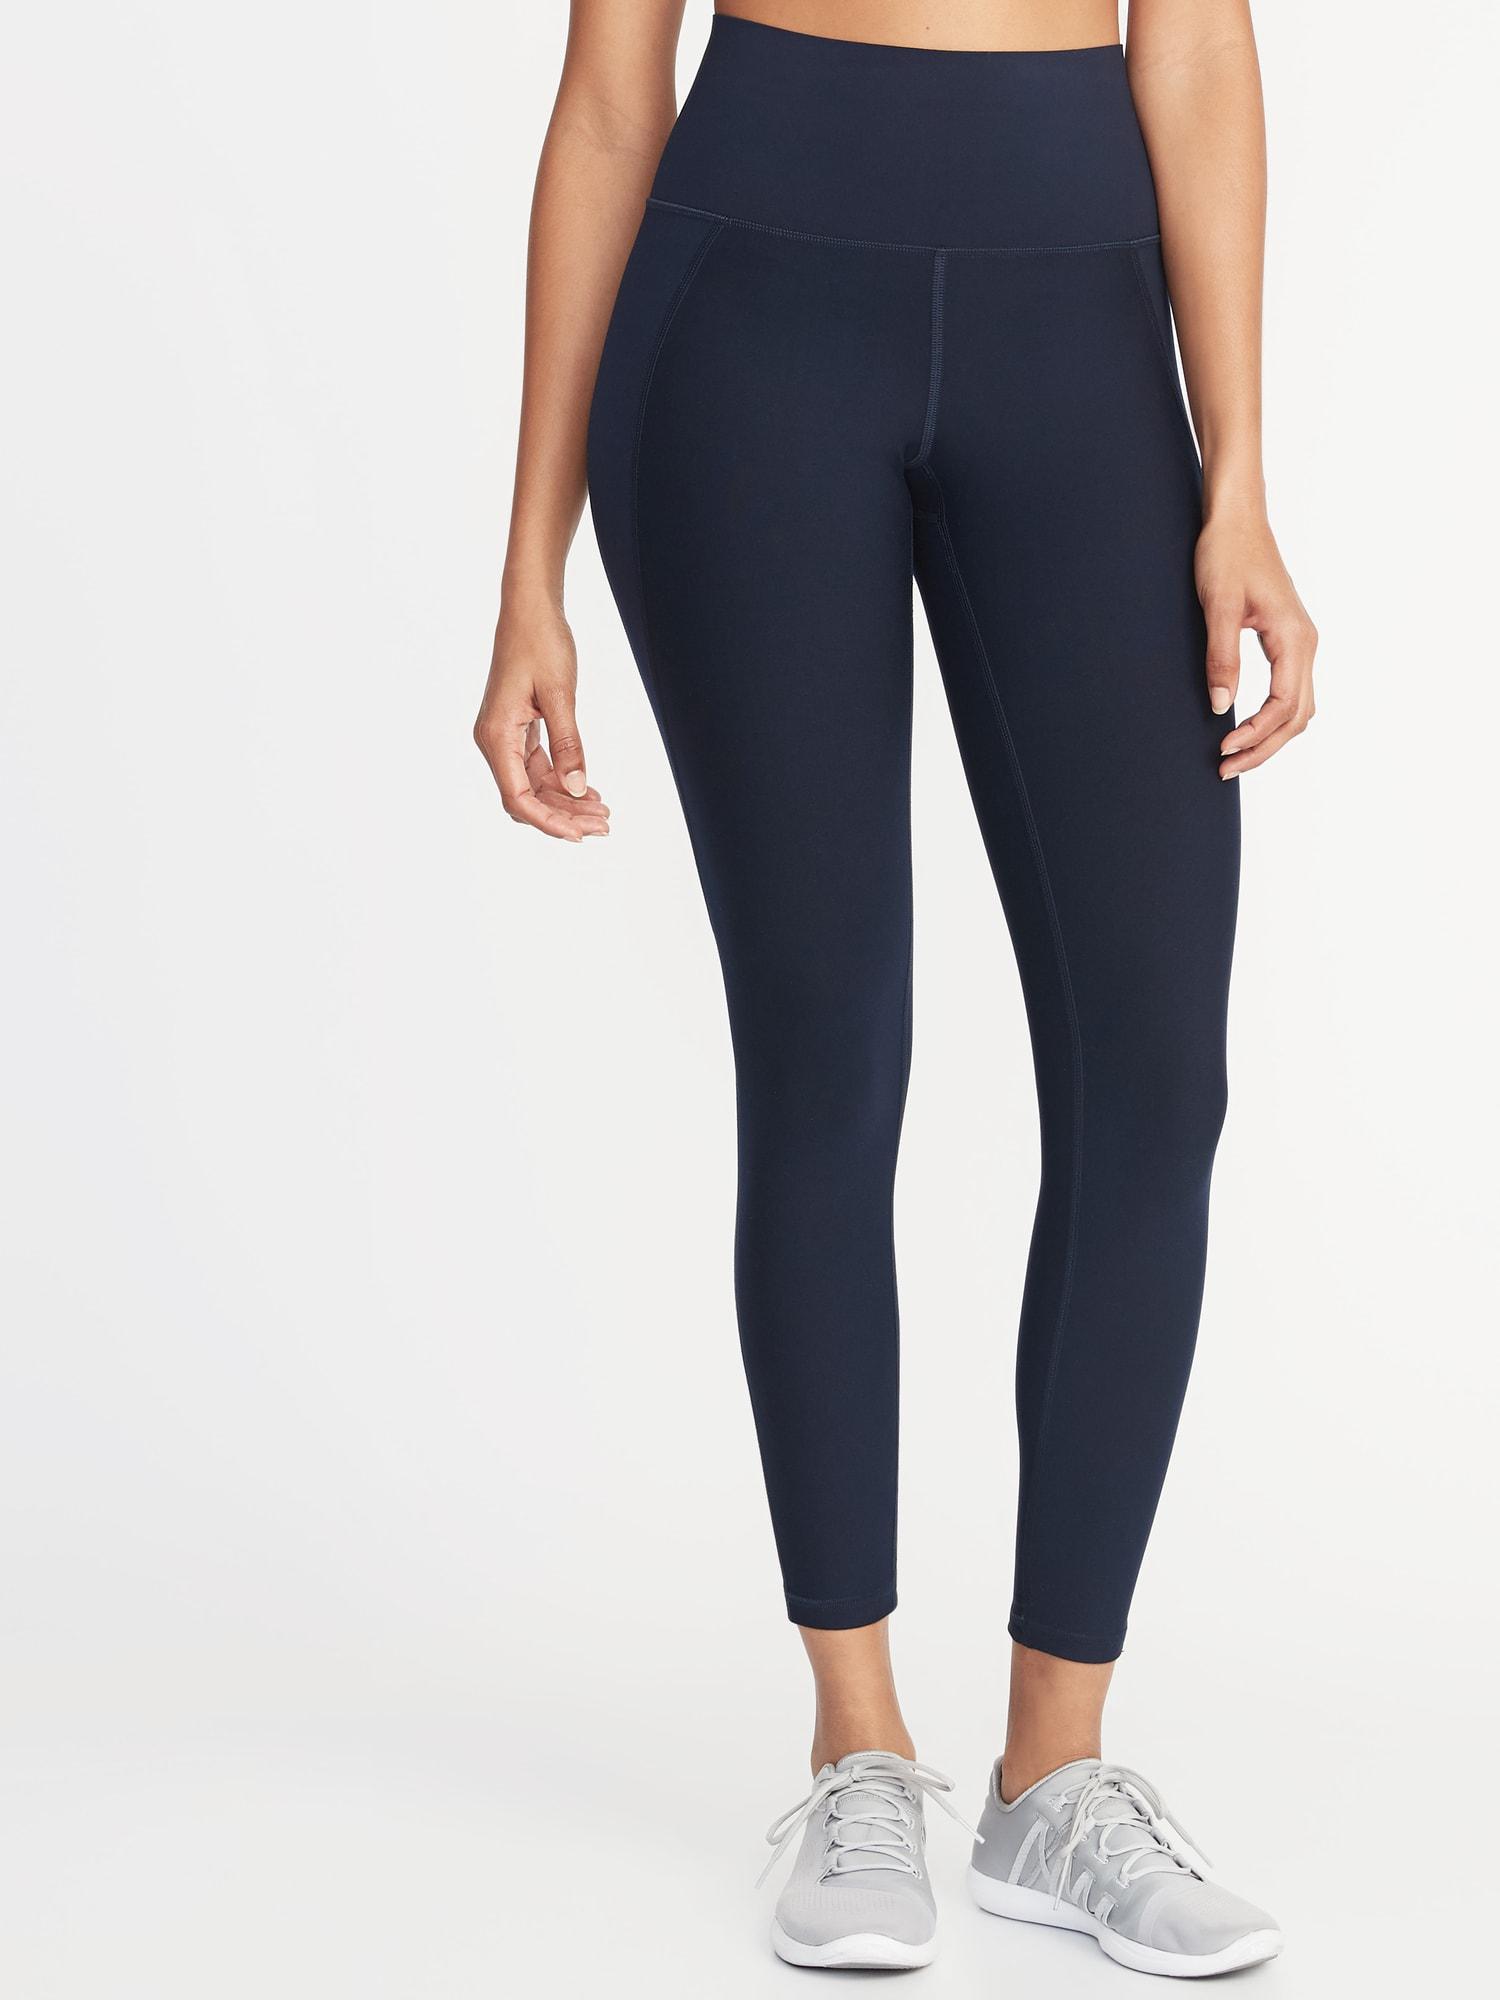 Mid-Rise Elevate 7/8-Length Mesh-Panel Compression Leggings for